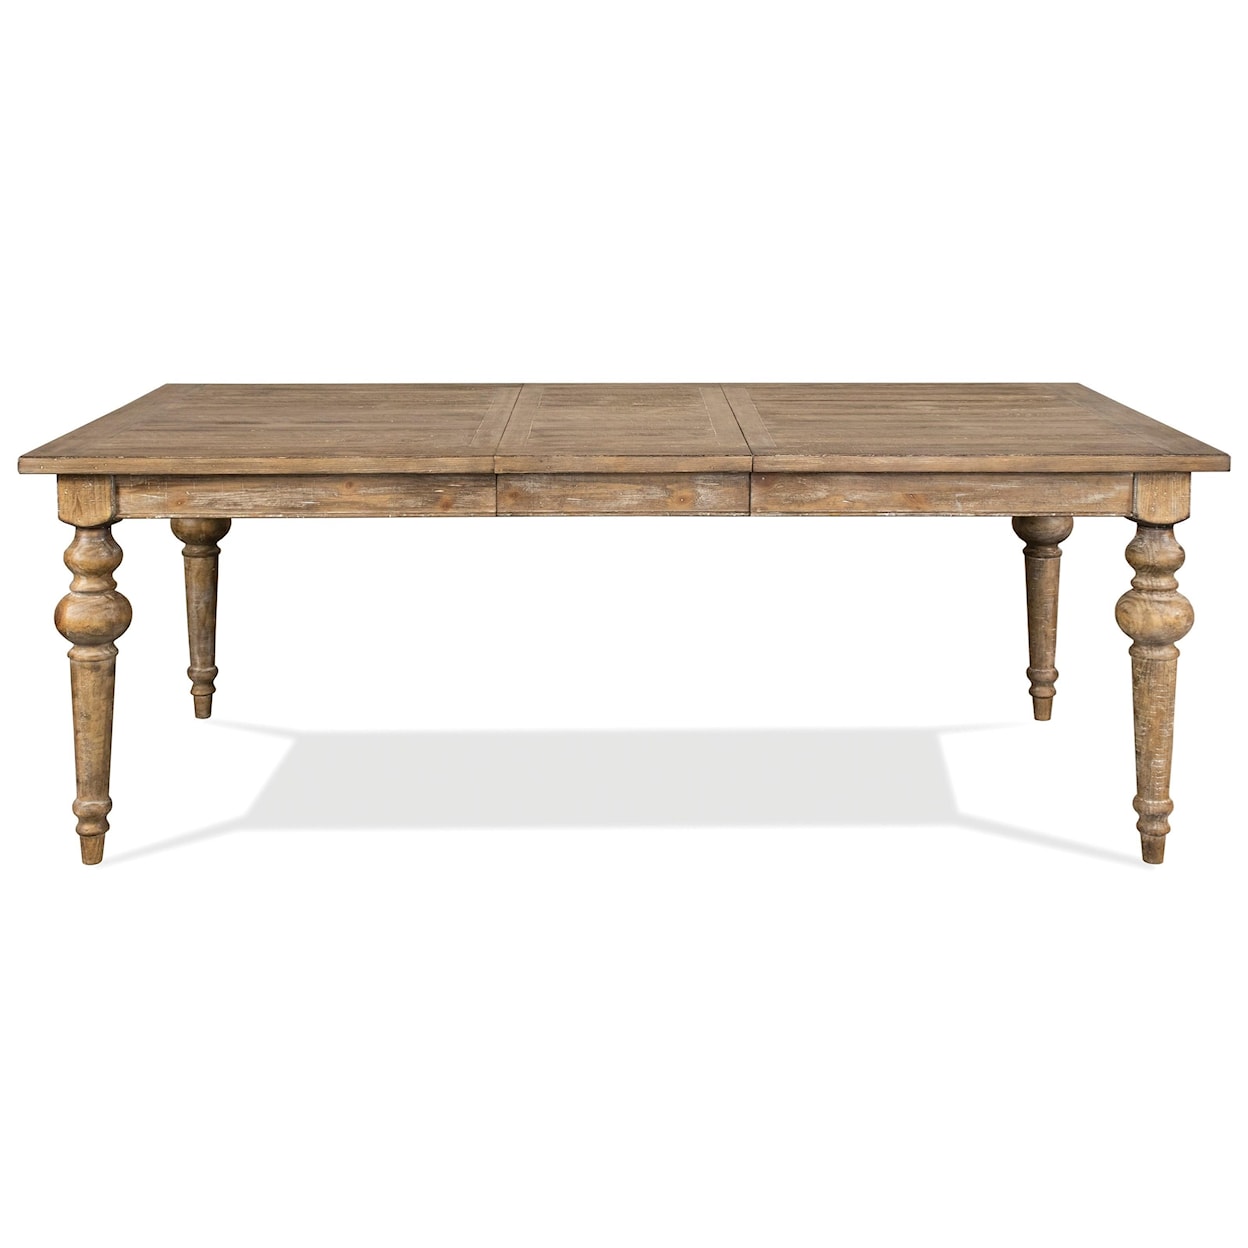 Riverside Furniture Sonora Dining Table